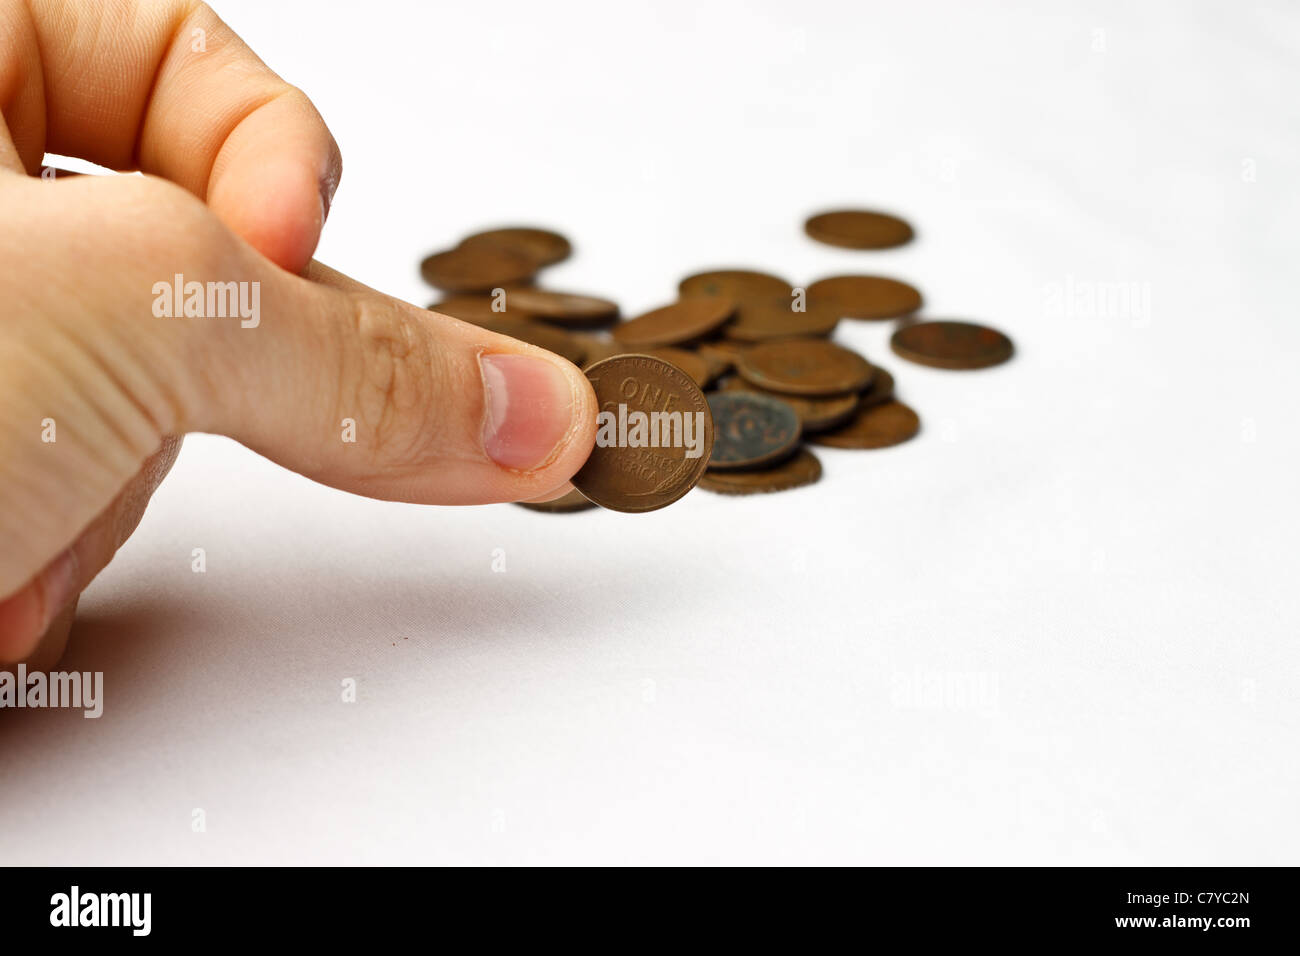 Person pinching a wheat penny in front of a small pile of wheat pennies on a white background Stock Photo